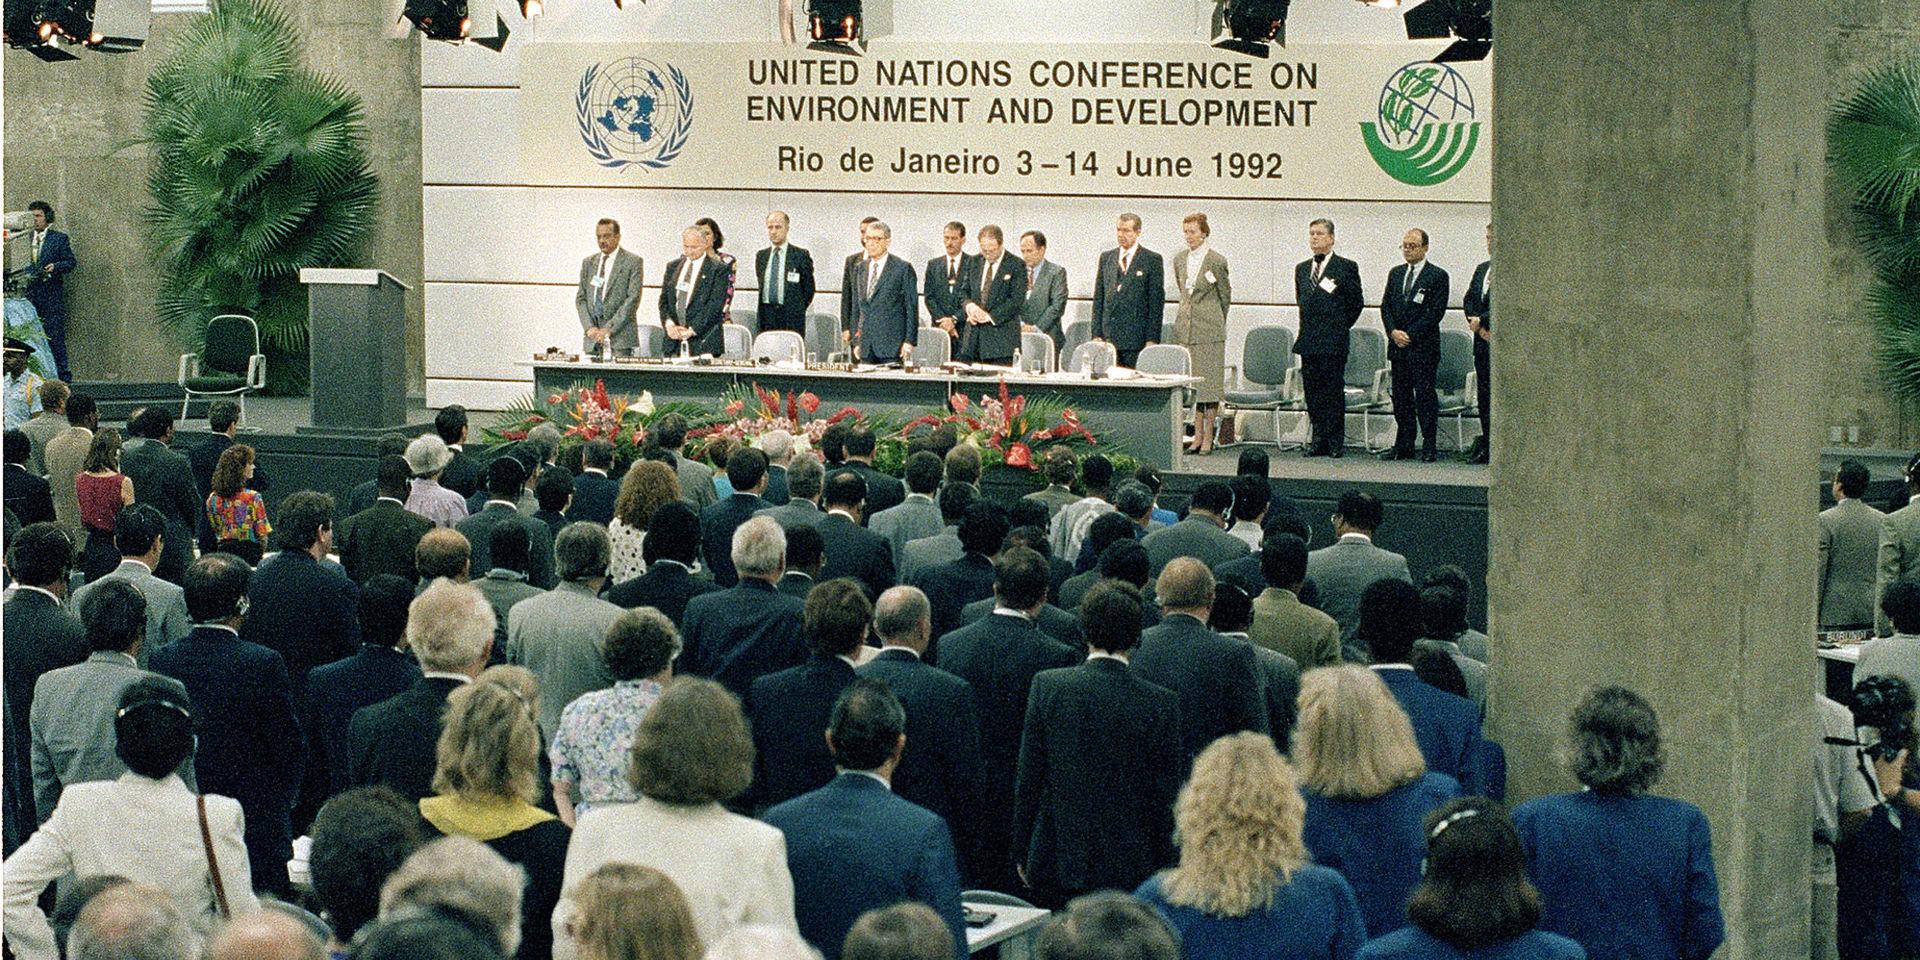 United Nations Secretary General Boutros Boutros-Ghali, center, and conference organizers are shown during opening ceremonies at the Earth Summit in Rio de Janeiro, Brazil, Thursday, June 3, 1992.  The 12-day summit, officially called the United Nations Conference on Environment and Development, is the largest gathering of heads of state, with more than 100 countries and delegations from 178 countries.  In addition, representatives of more than 1,000 non-governmental organizations (NGOs) will attend the meetings.  (AP Photo/Eduardo DiBaia)